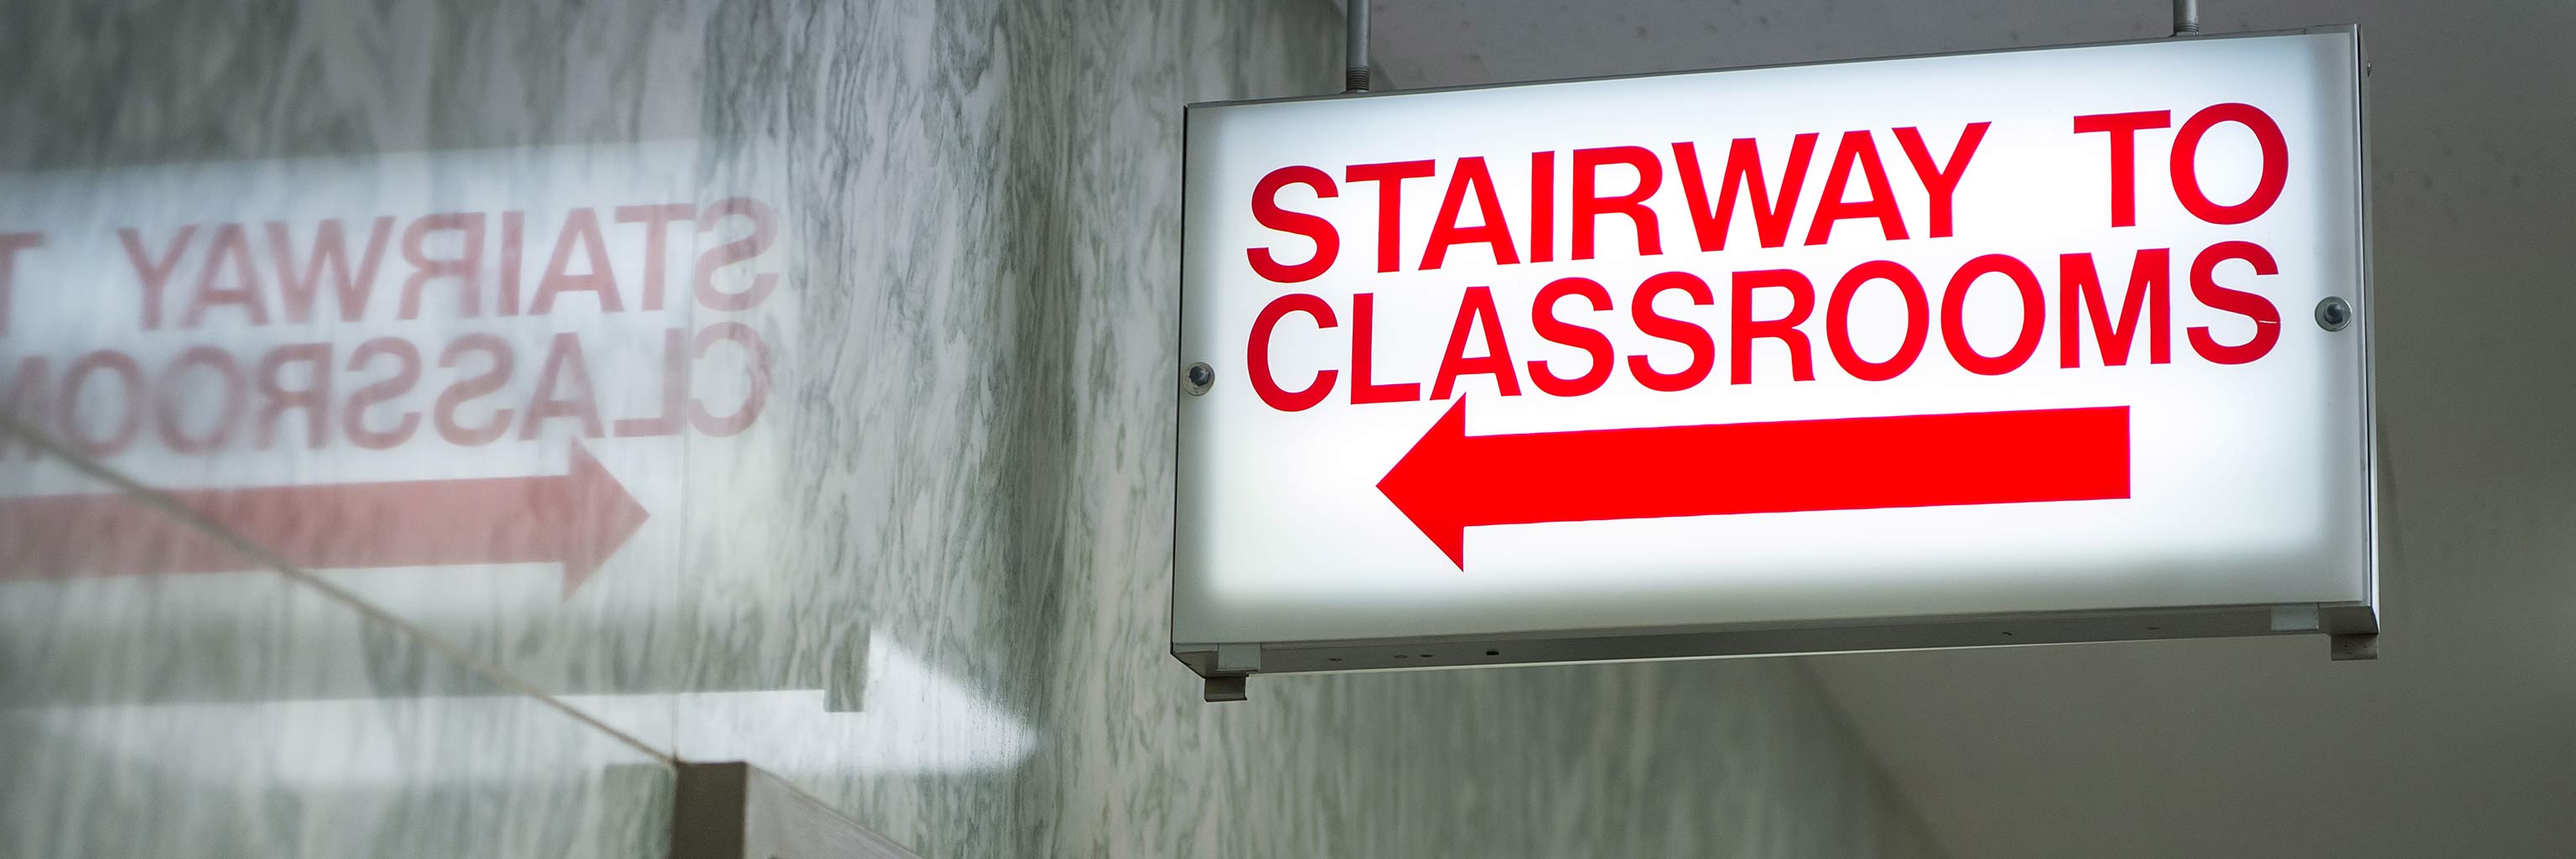 light up sign that says stairway to classrooms